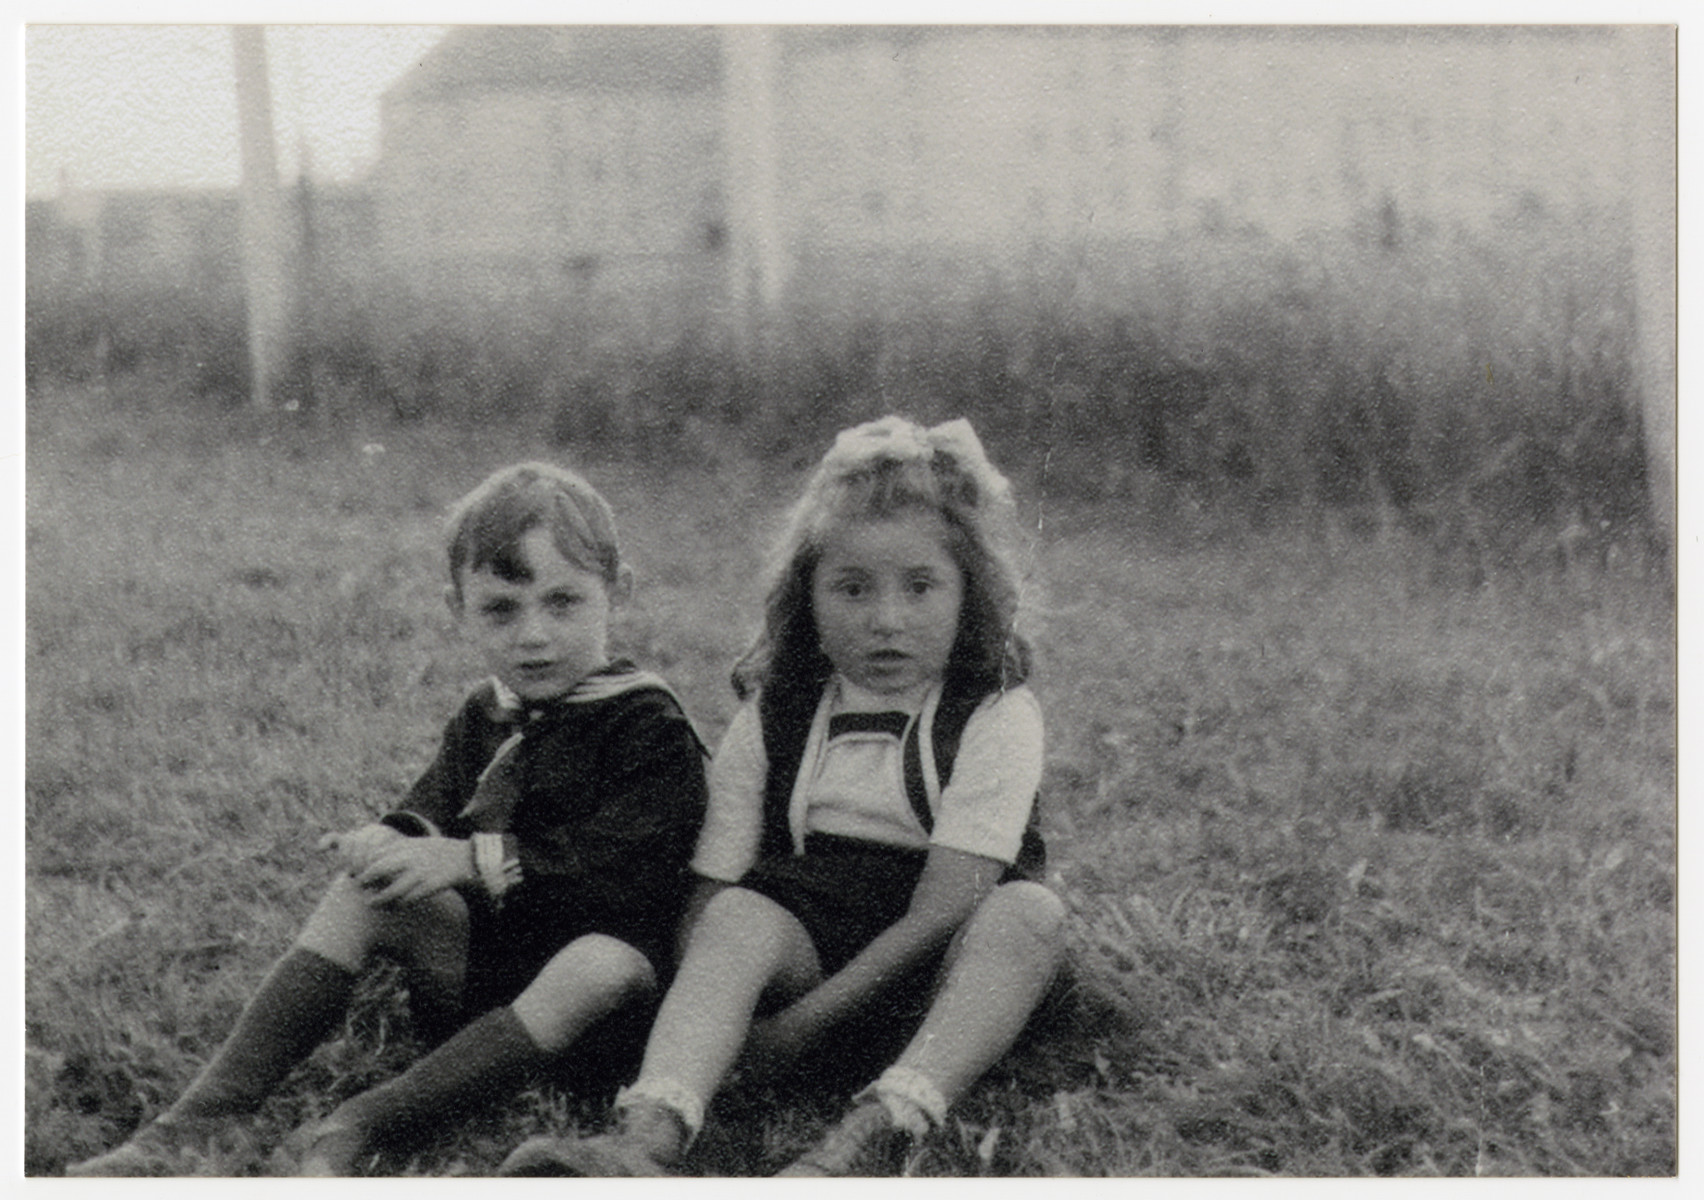 Close-up portrait of two Jewish children [probably in the Steyr] displaced persons camp in Austria.

Pictured on the left is probably Hershel Raysman.